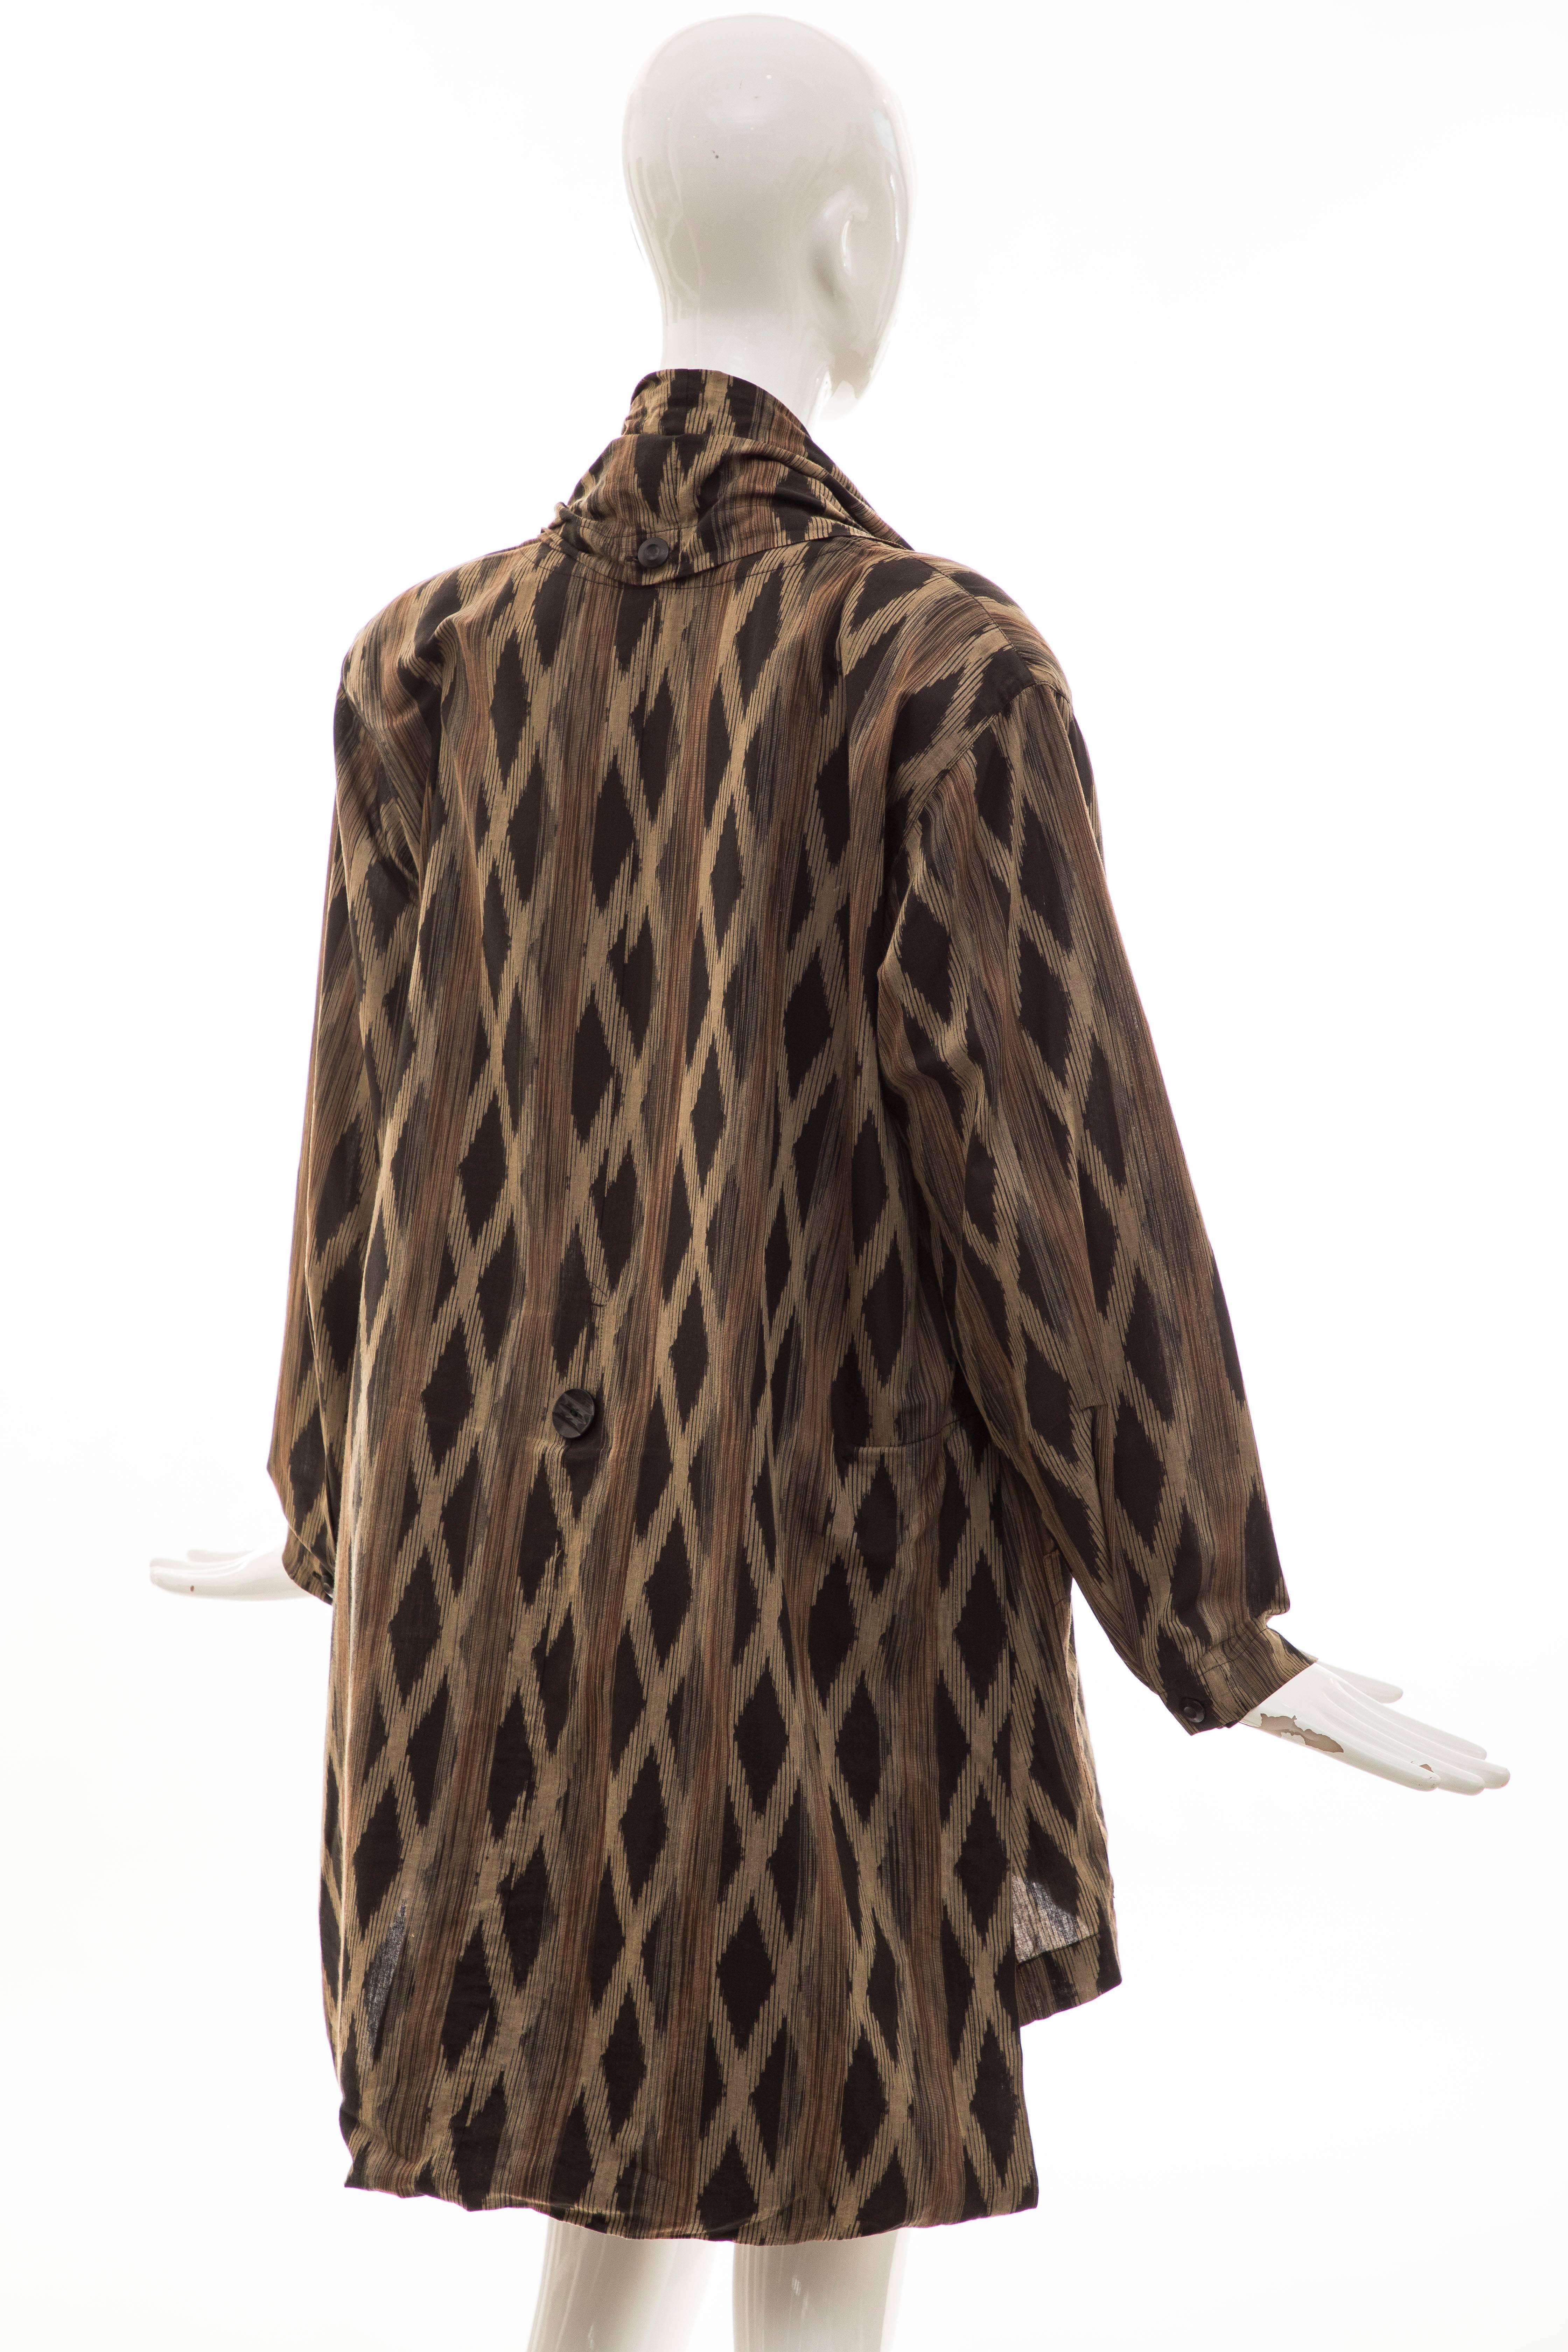 Issey Miyake Cotton Silk Lattice Weave Jacket Duster Cardigan, Fall 1986 For Sale 2